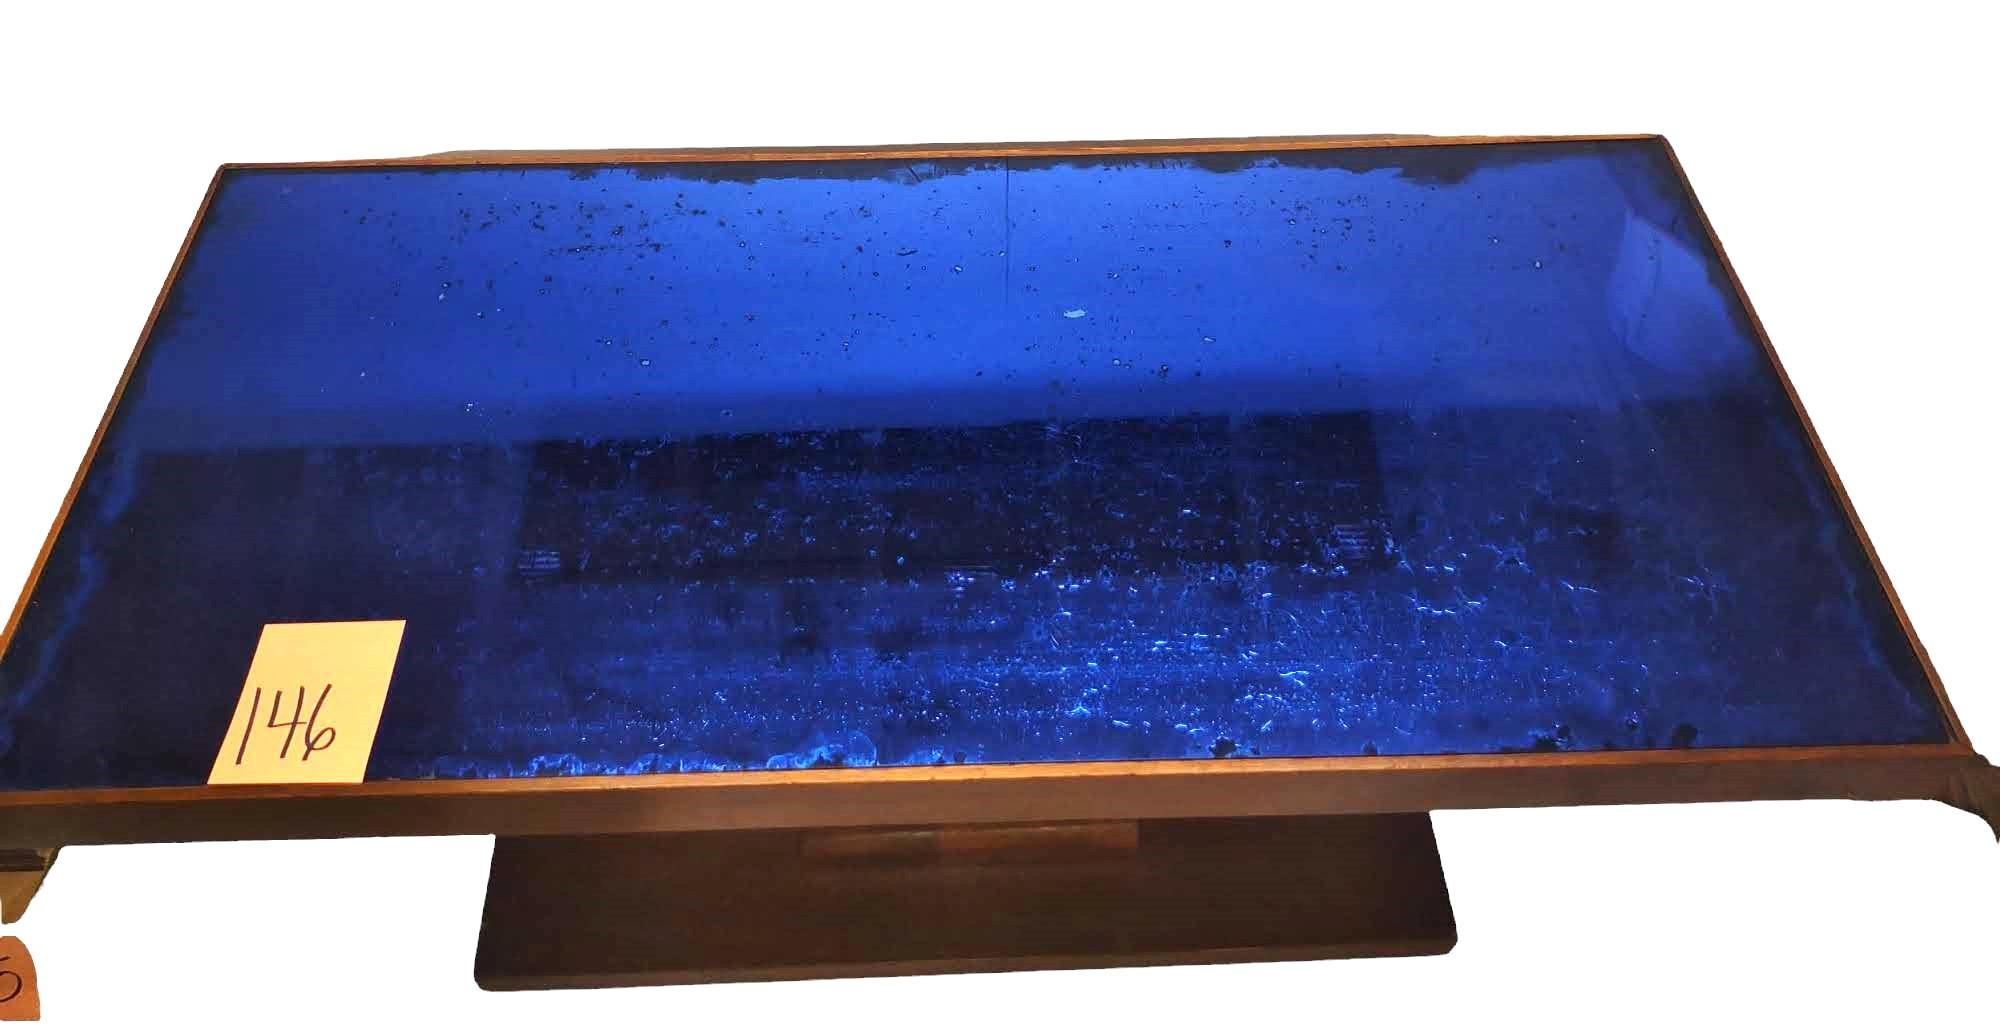 VINTAGE ART DECO COFFEE TABLE with BLUE GLASS "AS IS" - PICK UP ONLY